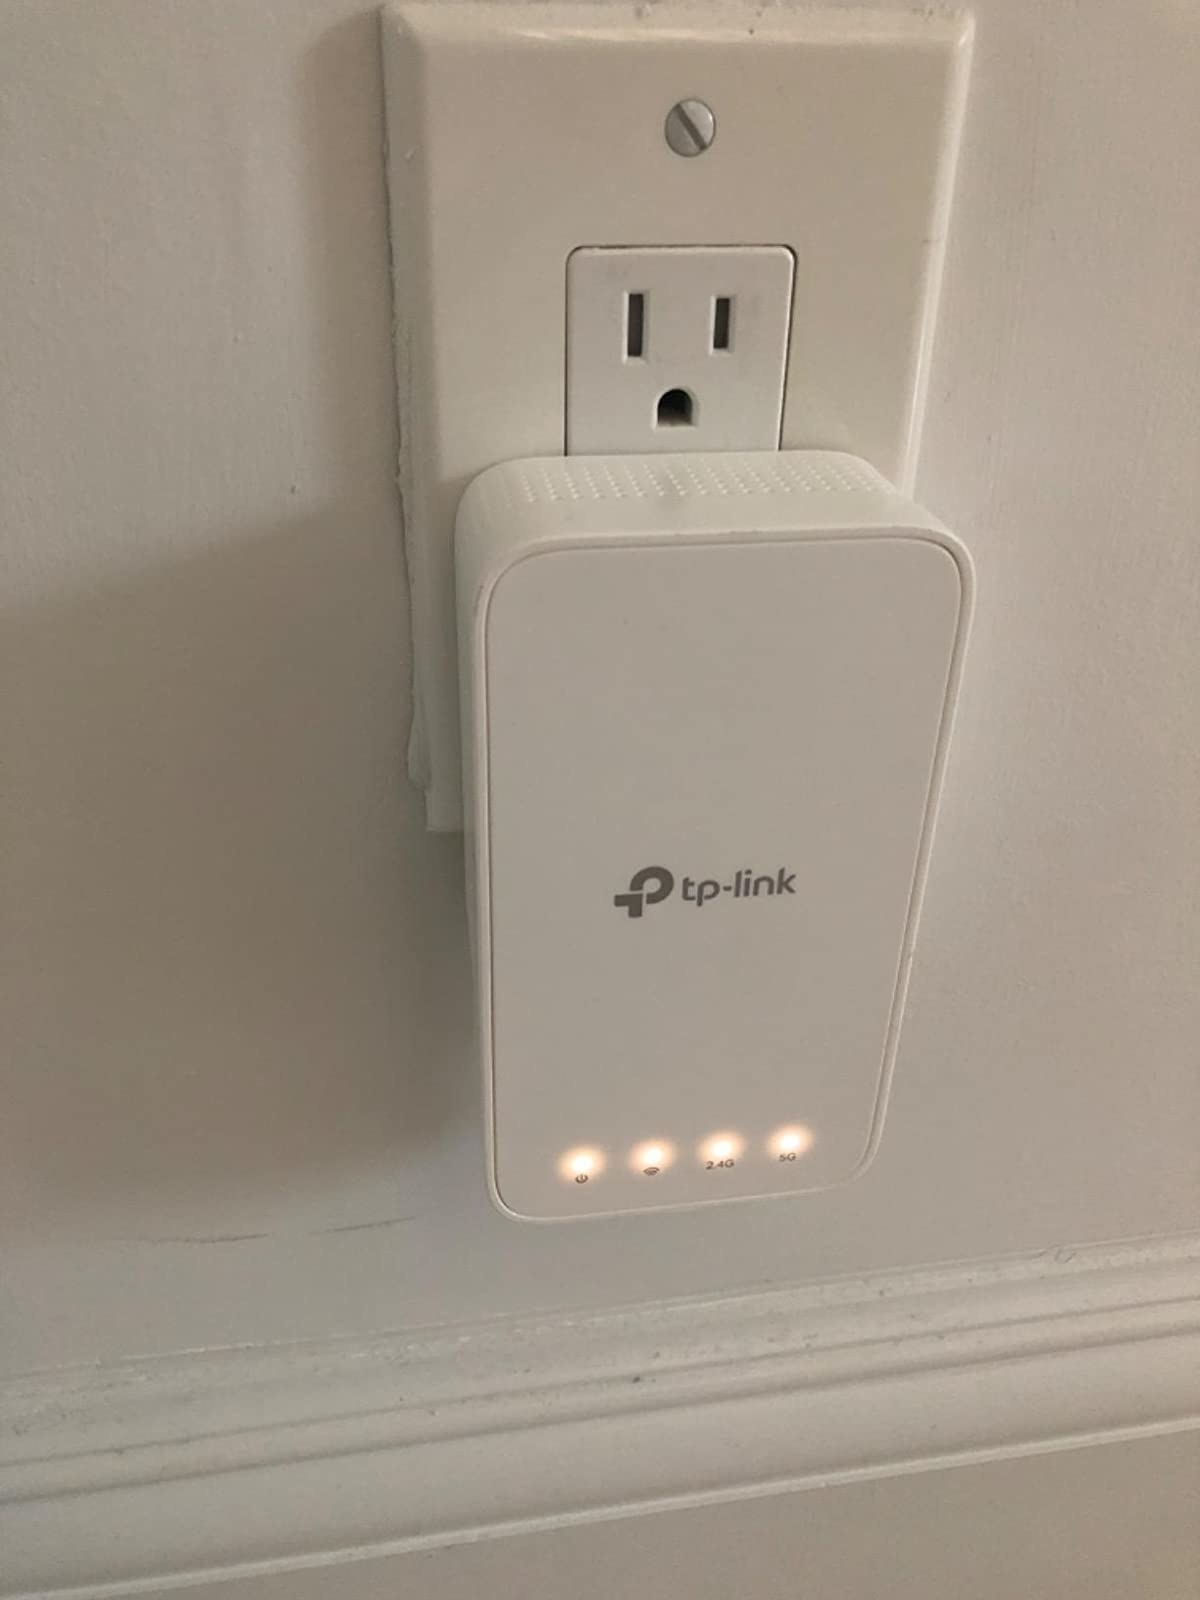 the wifi extender